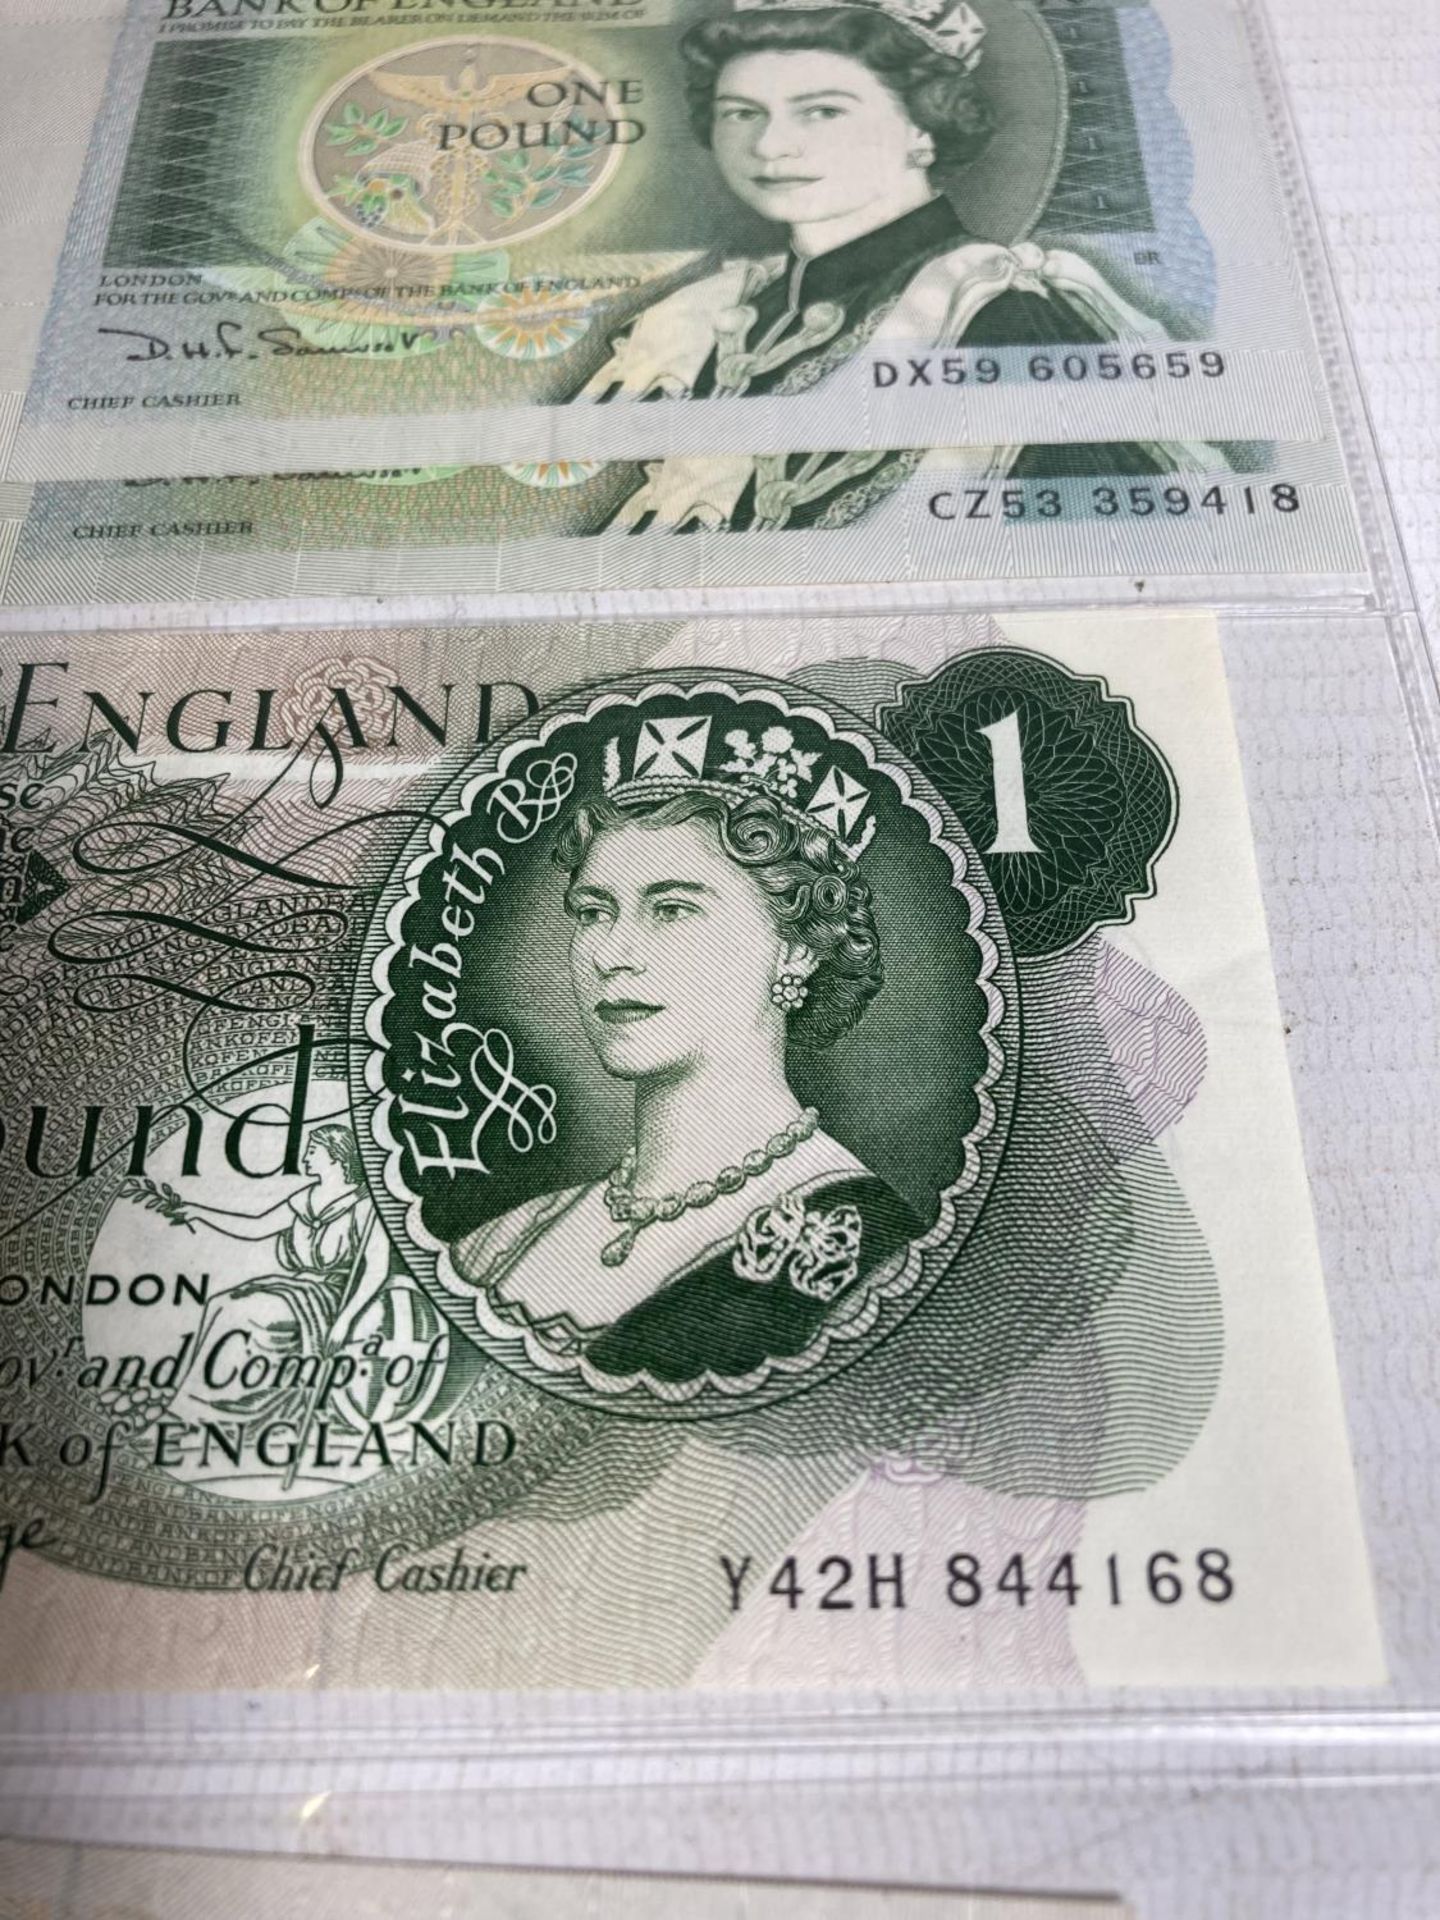 FOUR BANK OF ENGLAND ONE POUND NOTES TWO SIGNED PAGE (1970-1980) AND TWO SOMERSET (1980-1988) - Bild 4 aus 7